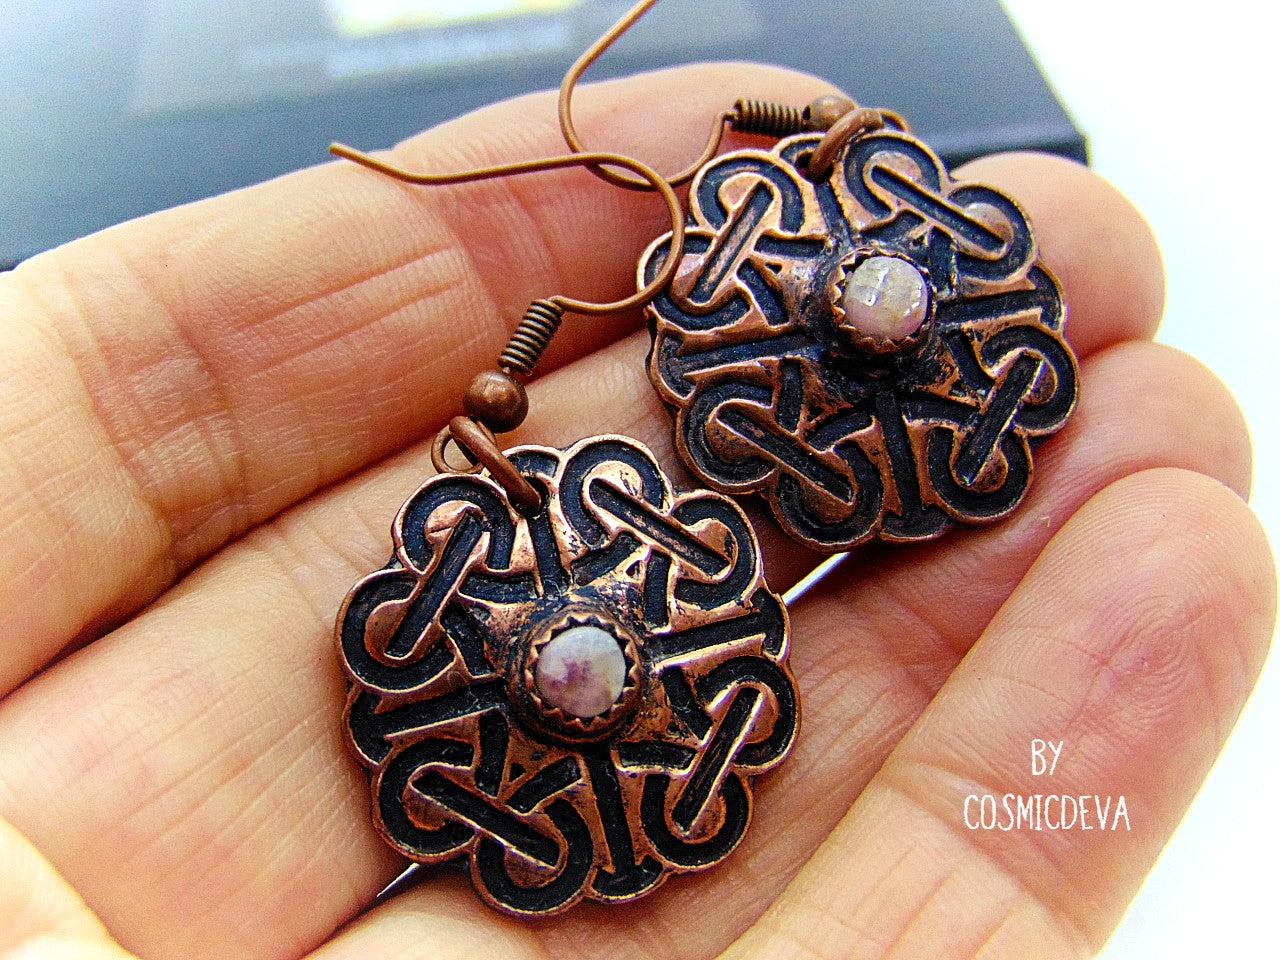 Handcrafted solid copper Celtic knot earrings featuring white natural tourmaline gemstones in the center. The Celtic knot is a significant symbol that is also referred to as the mystic or endless knot, and the symbolism behind it involves beginnings and endings